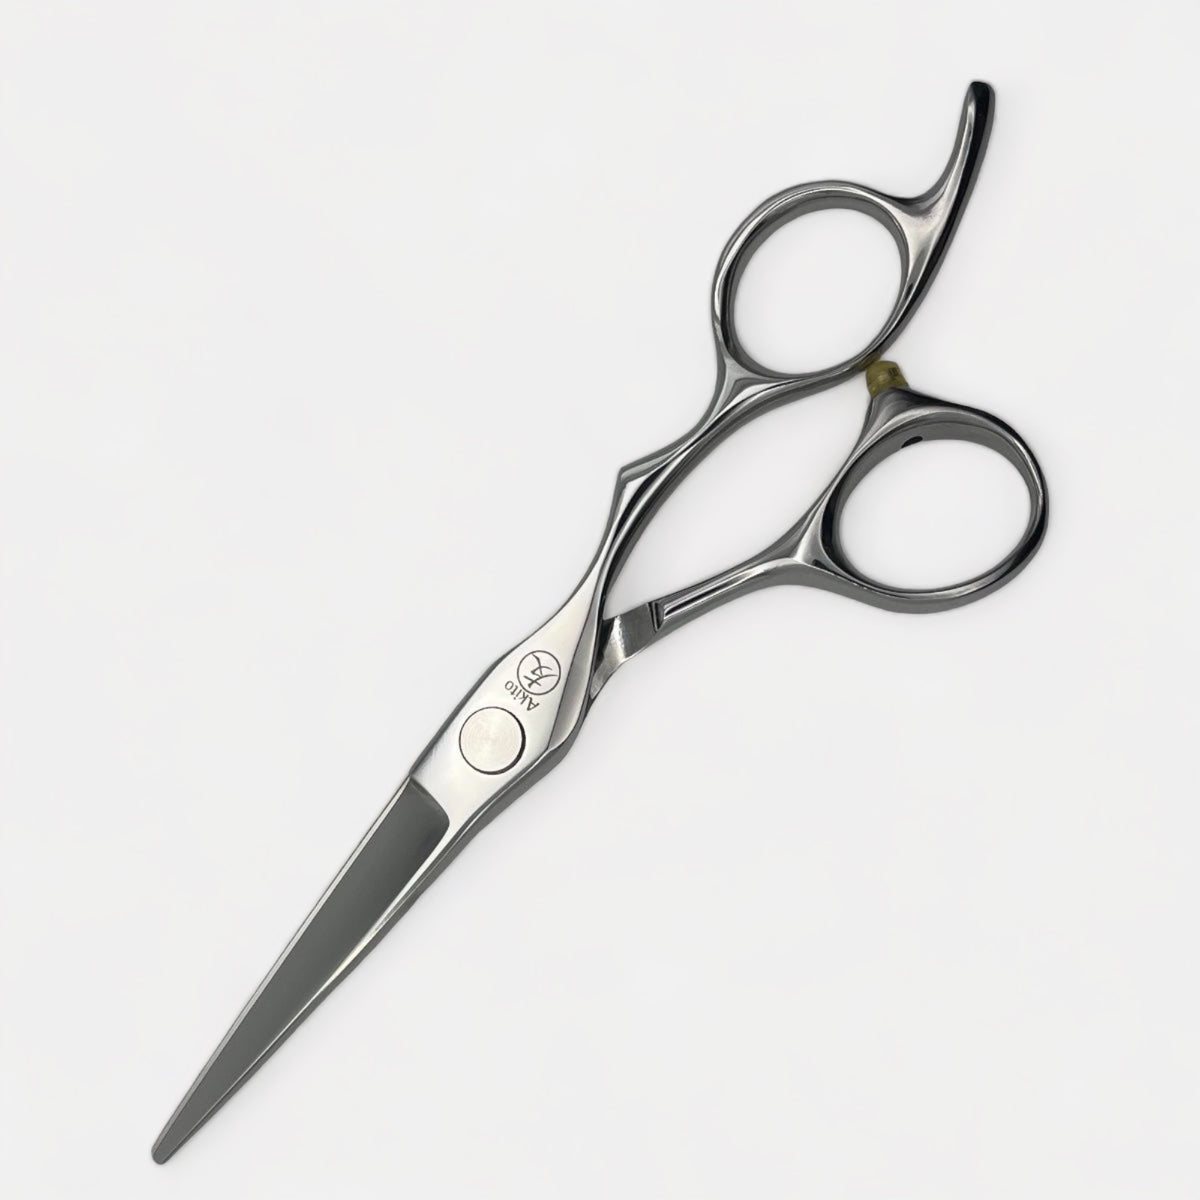 Kaito Professional Hairdresser Scissors side angle